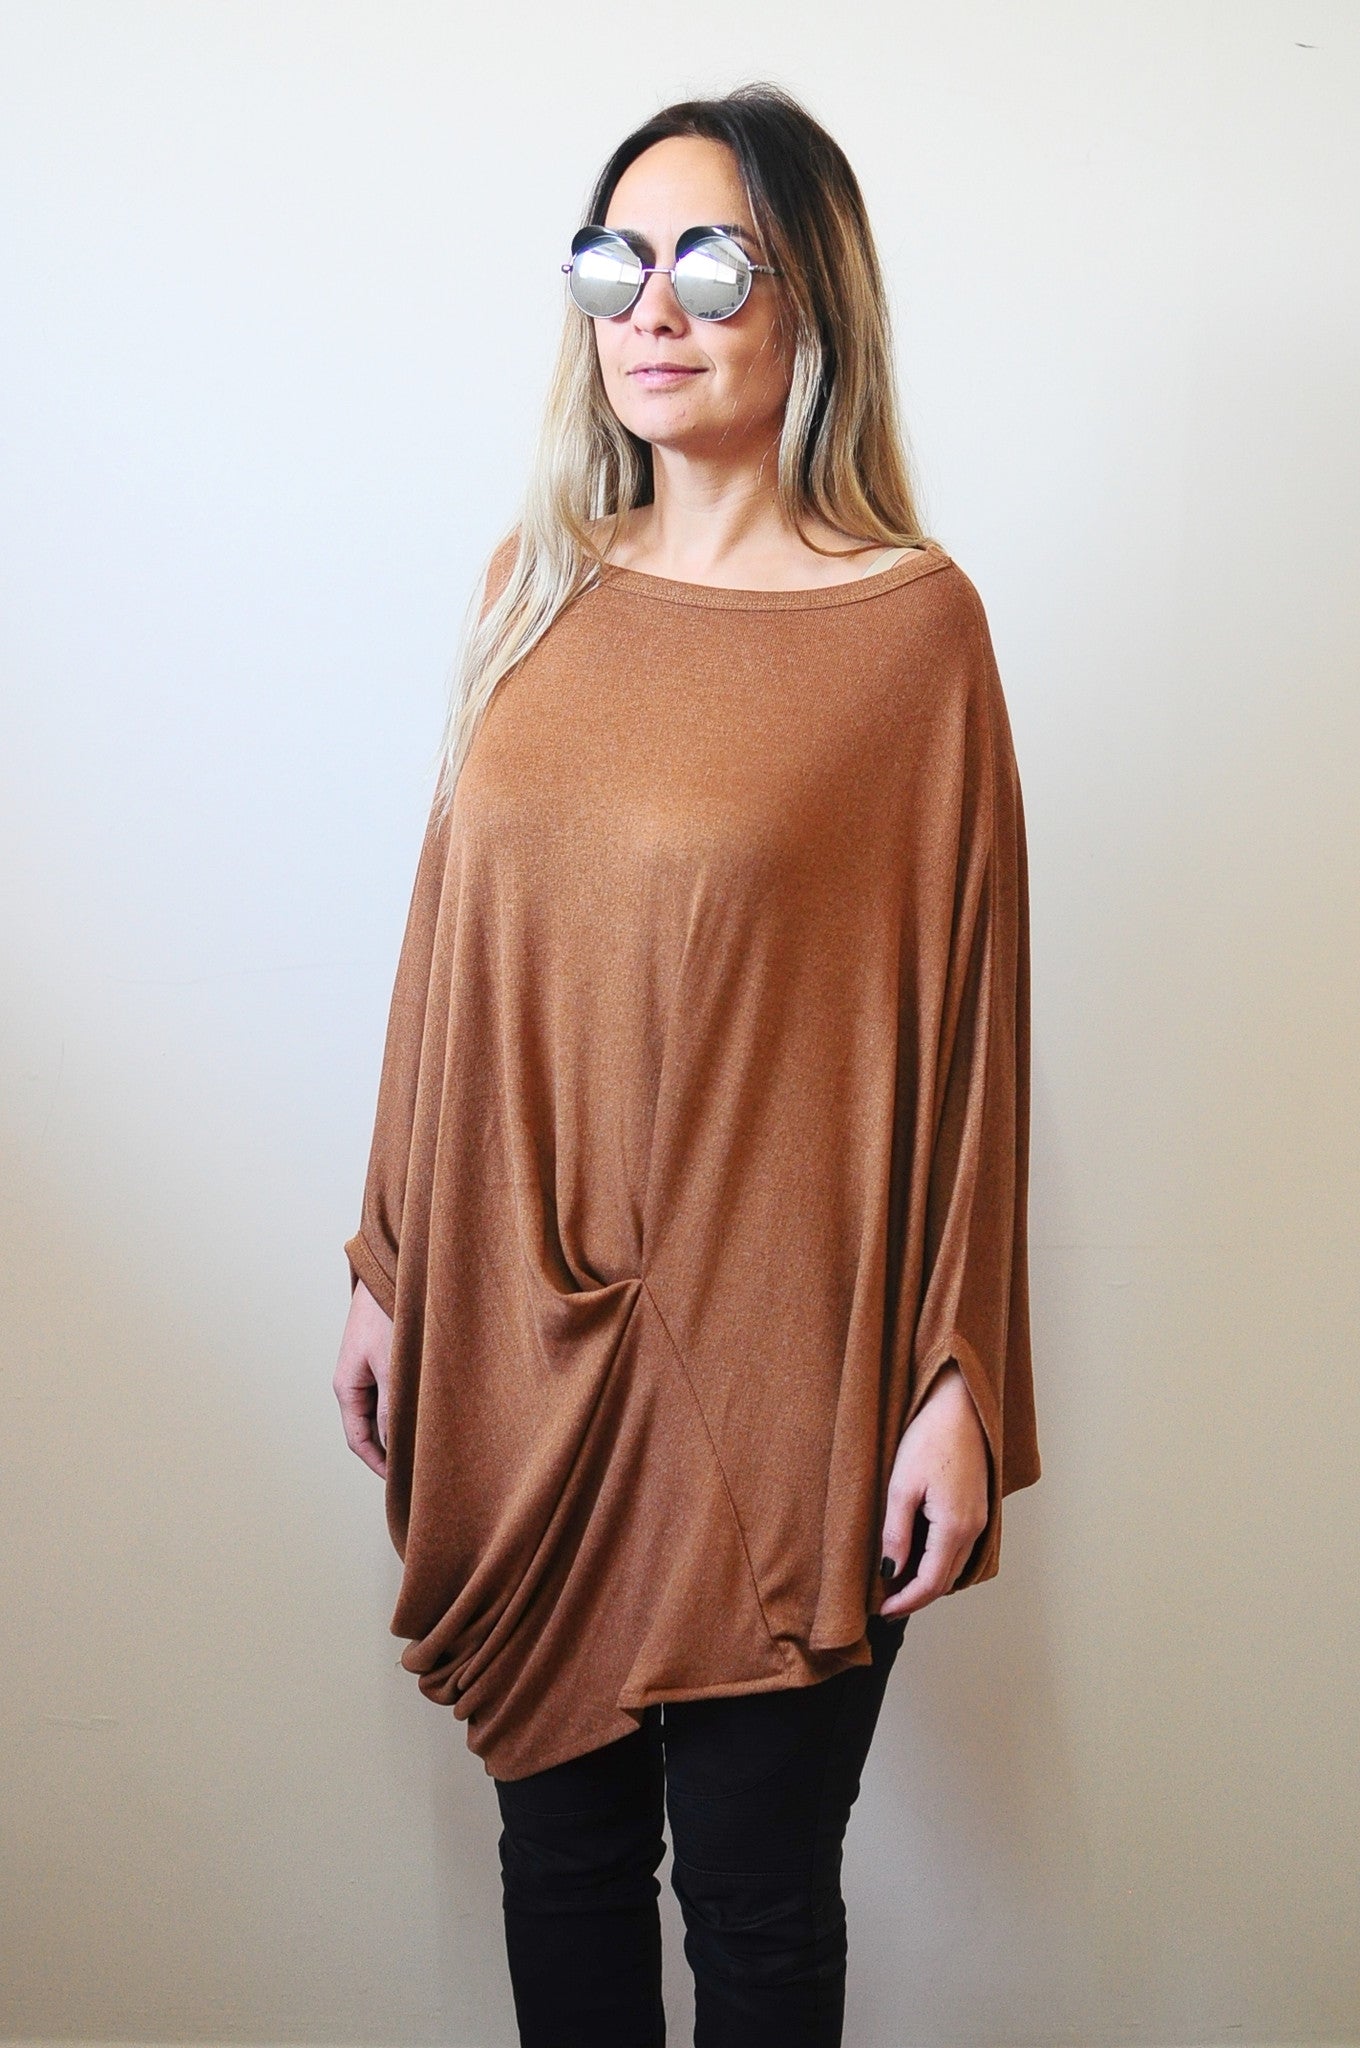 Women's Twisted Top / Loose Casual Cotton Blouse